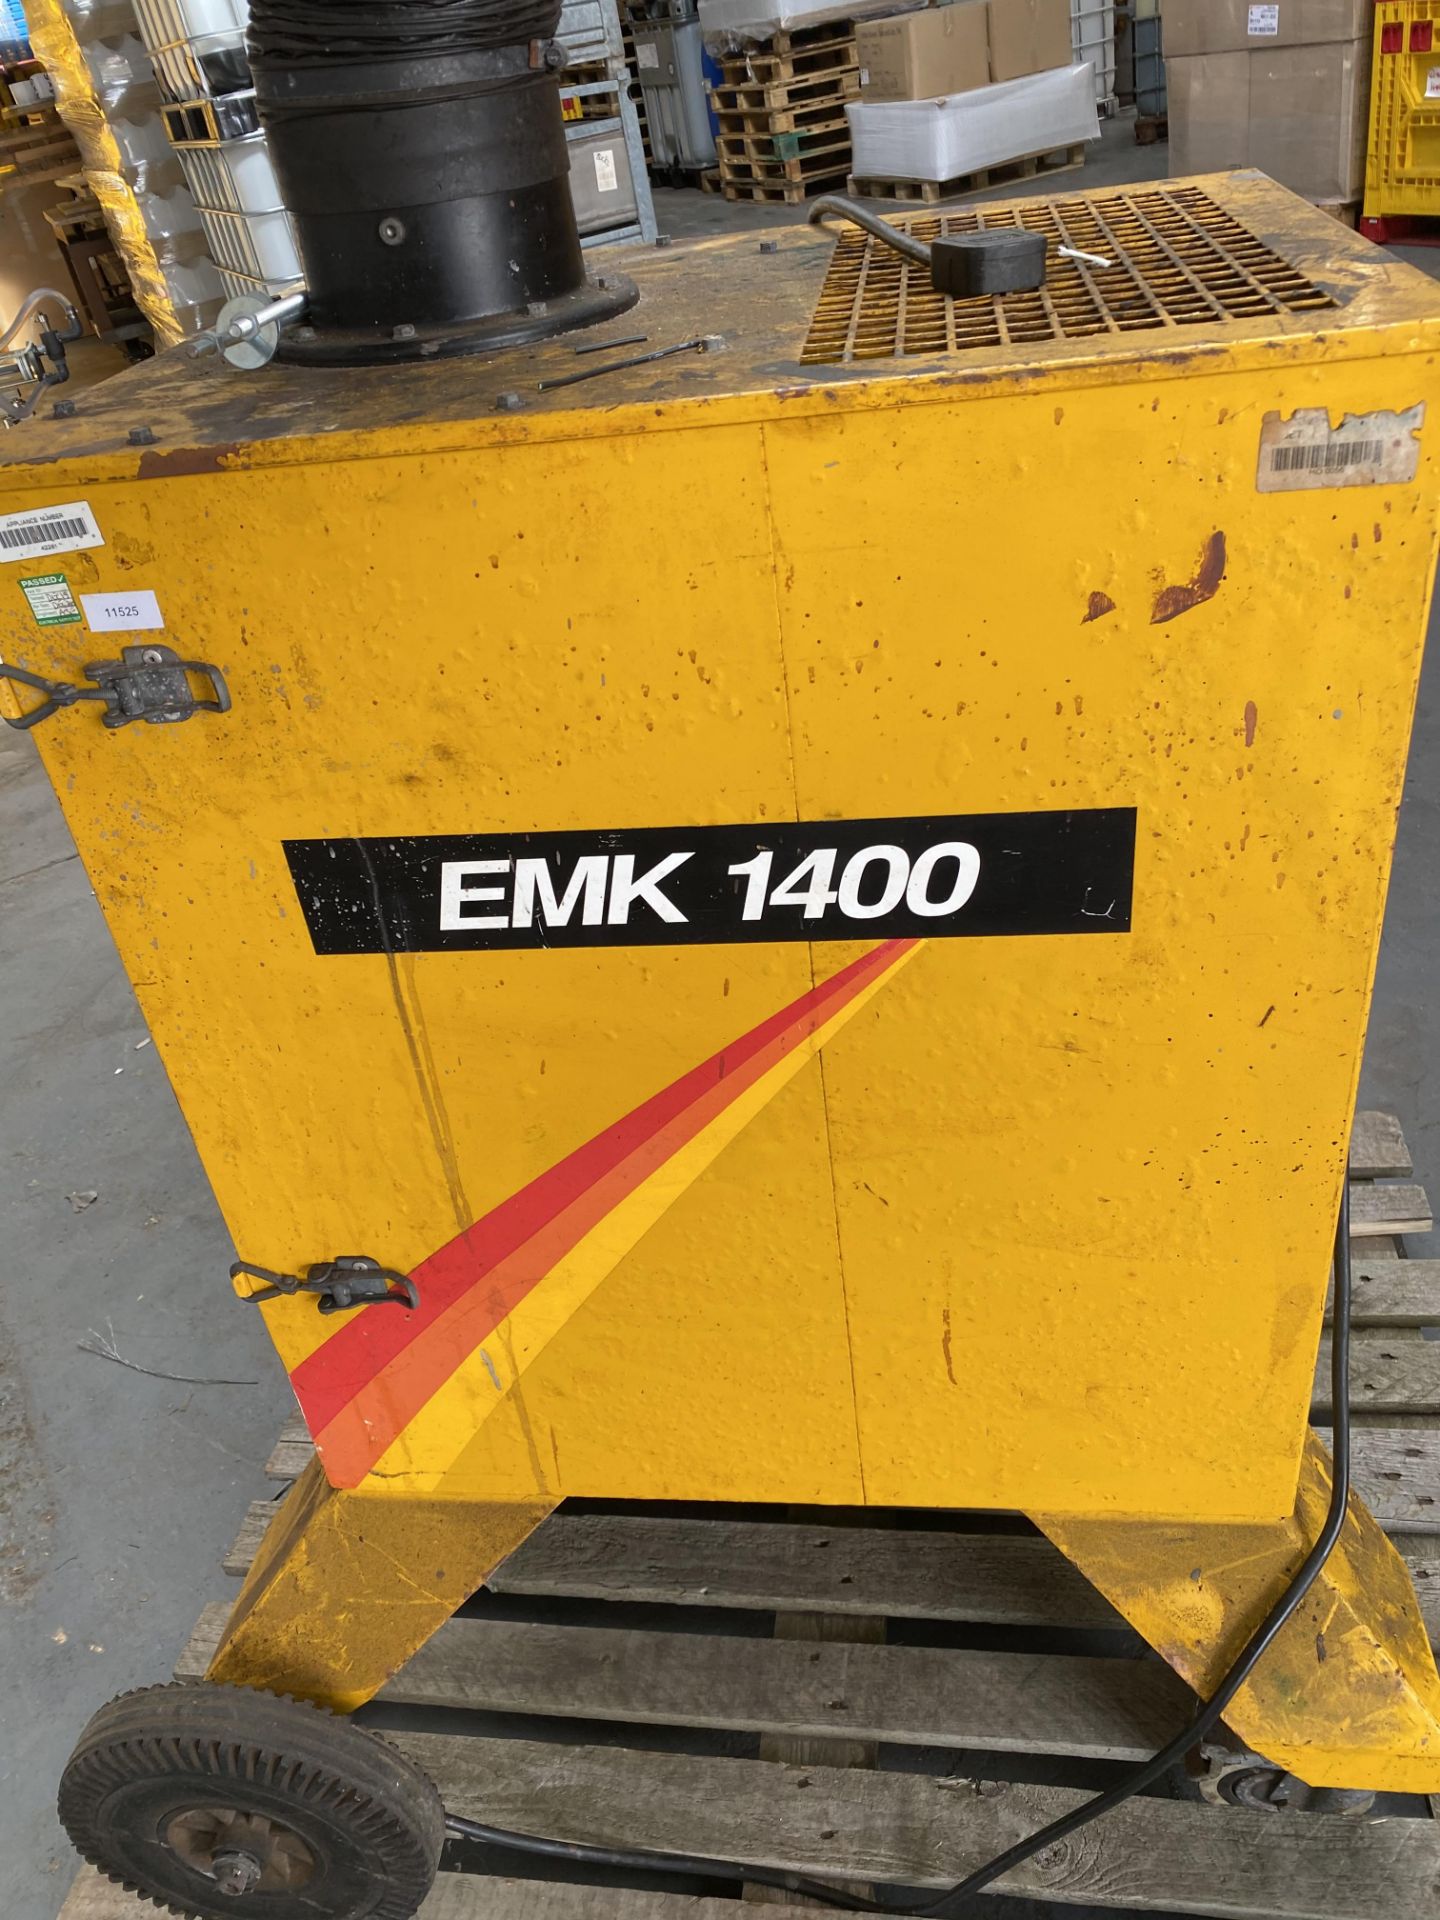 Plymouth EMK 1400 Fume Extractor, loading free of - Image 4 of 6